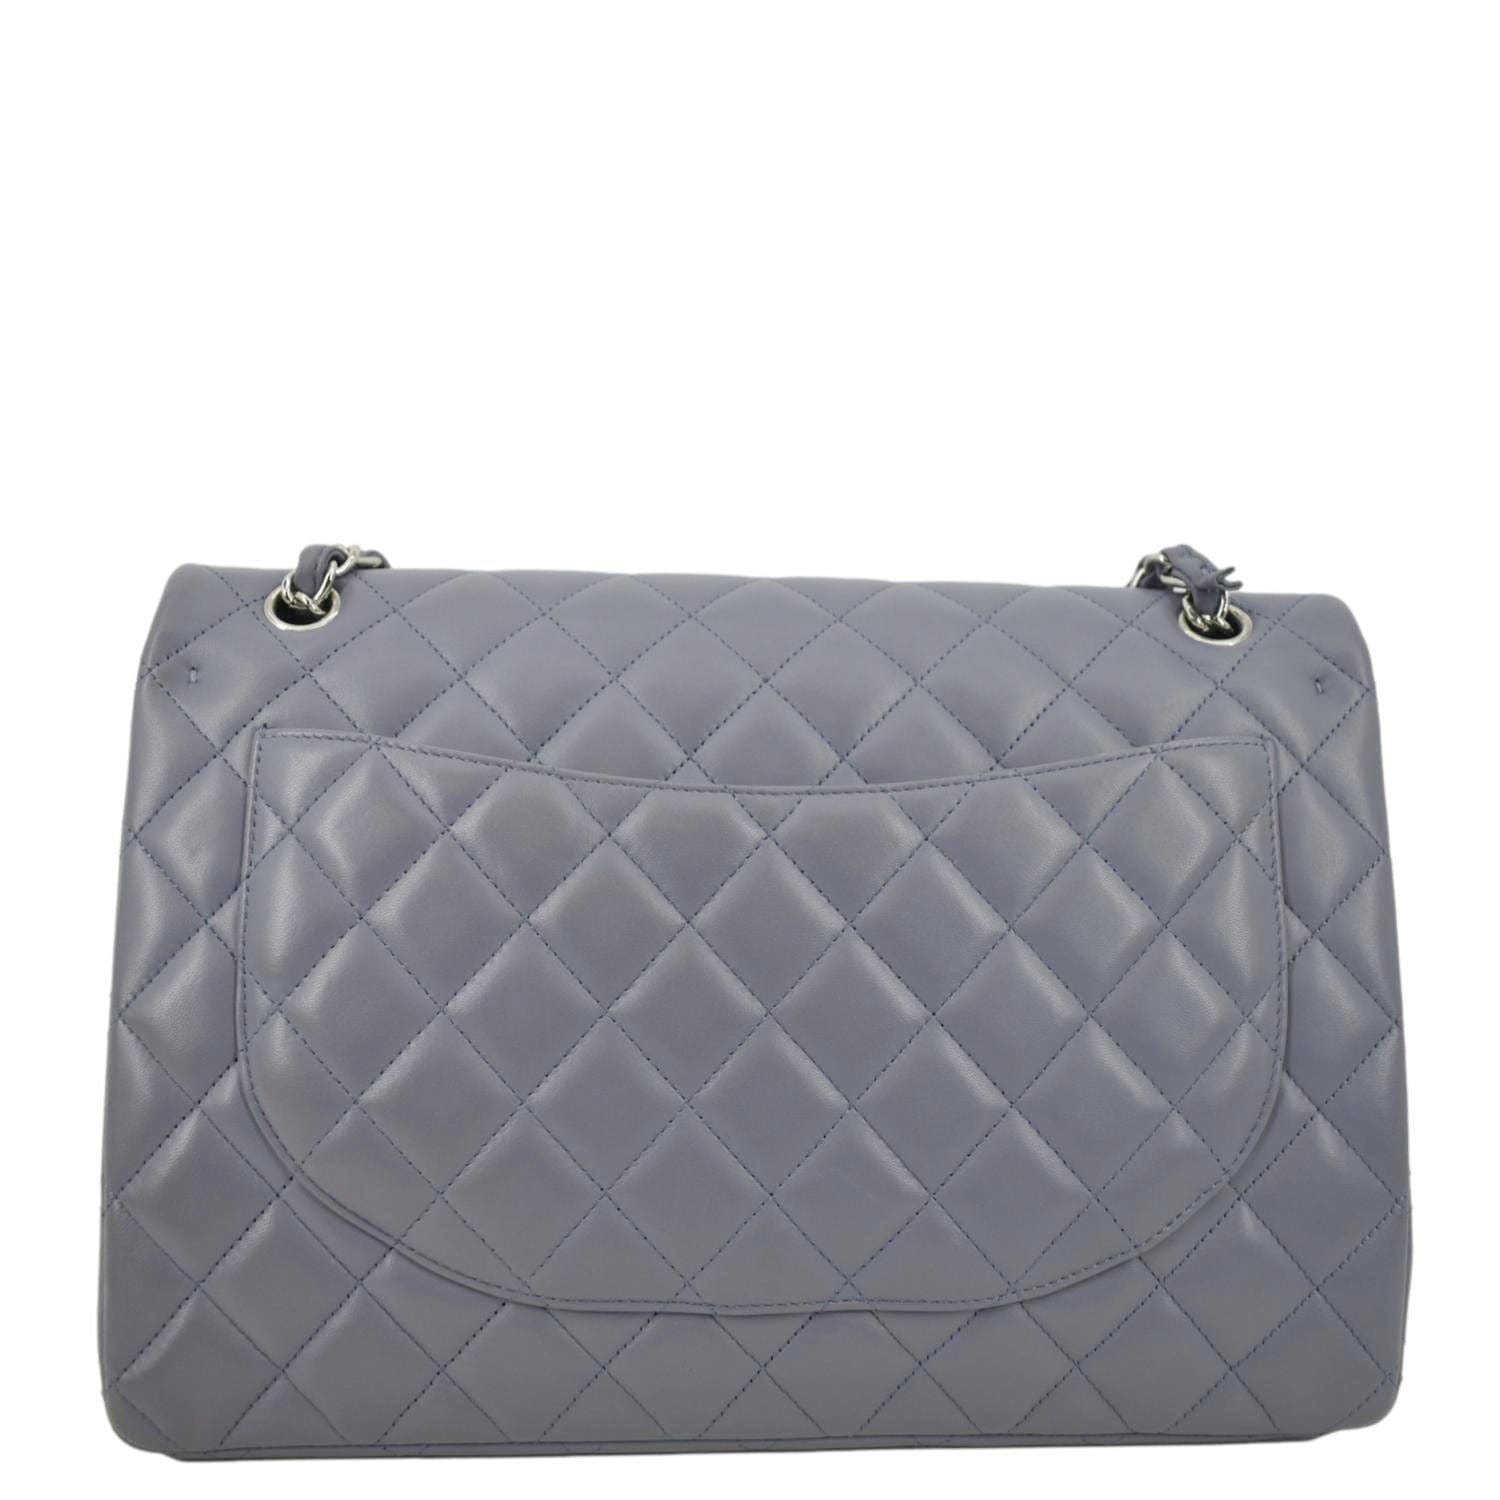 Chanel Medium Timeless Shoulder Bag In White Caviar Leather With Silver  Hardware